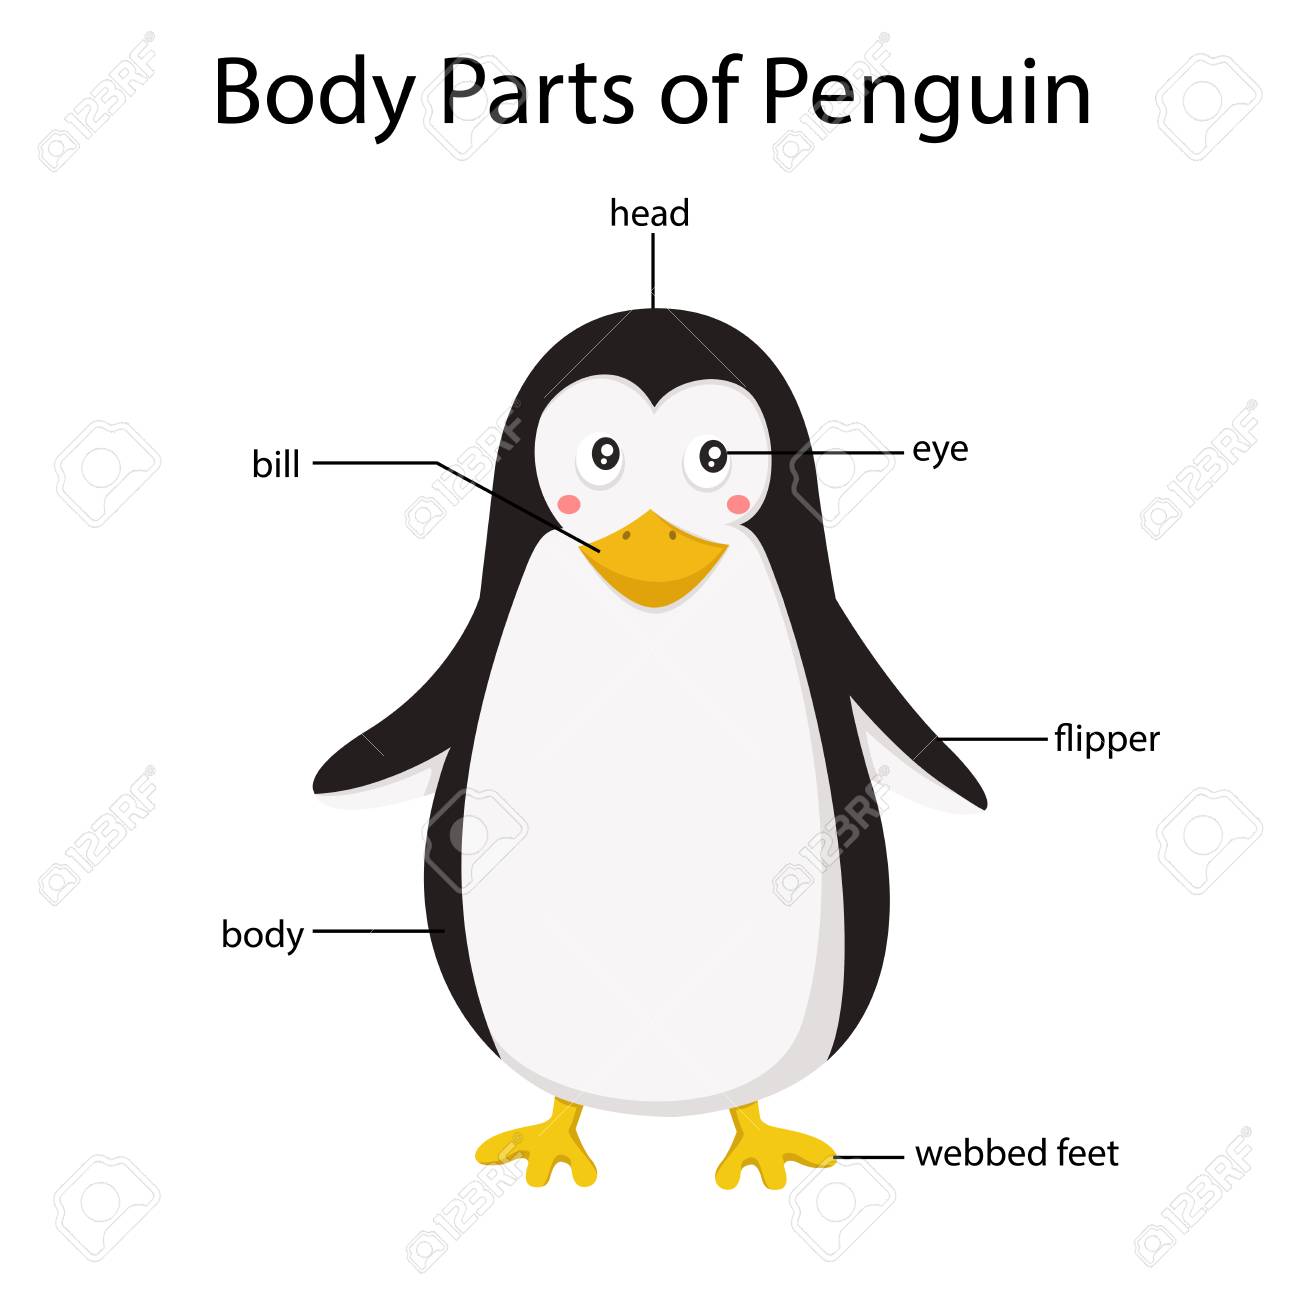 What are the body parts of a penguin?